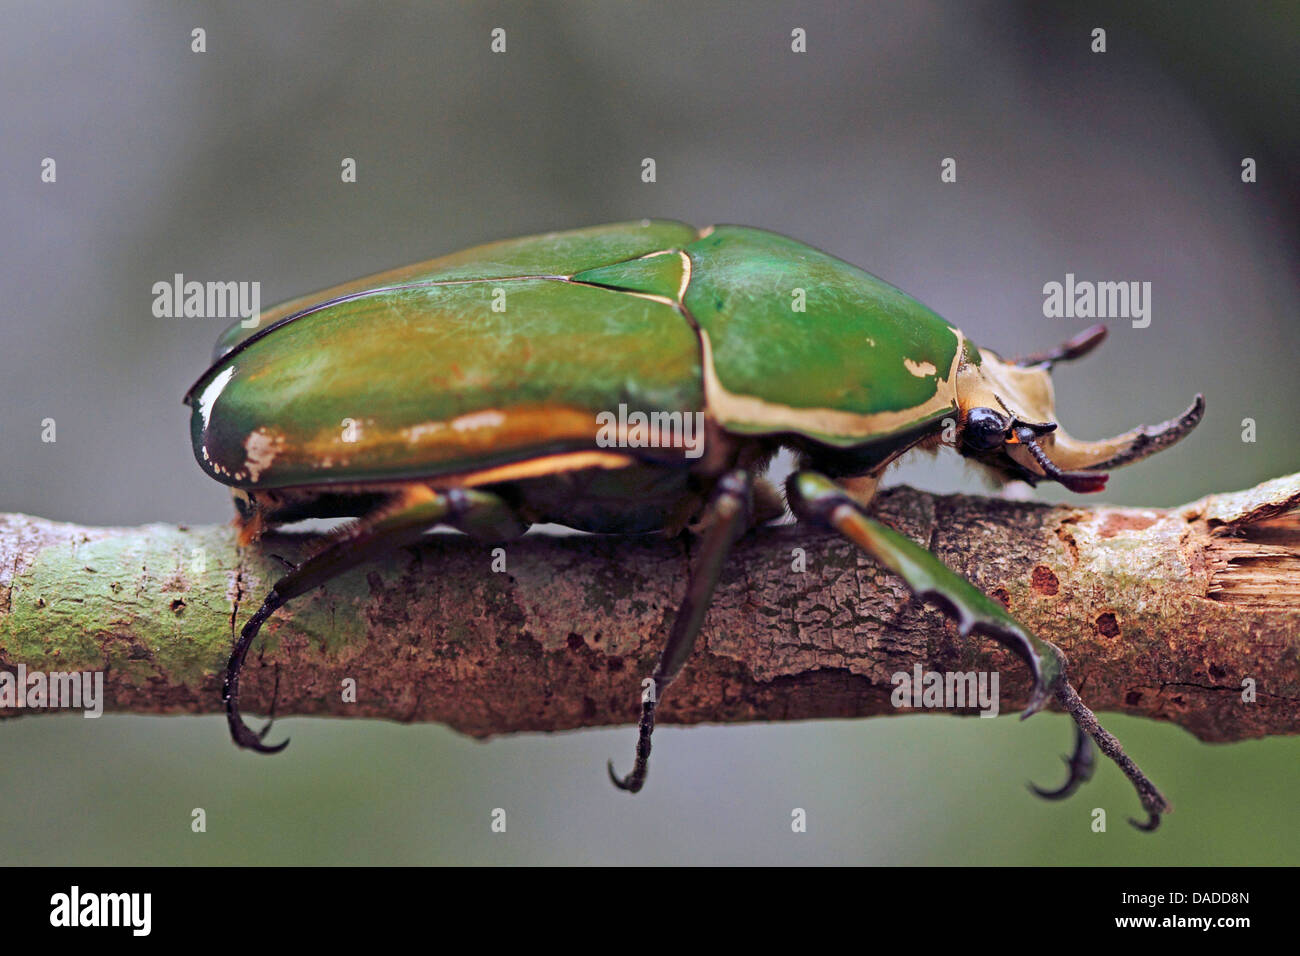 Flower Beetle (Mecynorrhina torquata immaculicollis), sitting on branch, Central African Republic, Sangha-Mbaere, Sangha Lodge Stock Photo